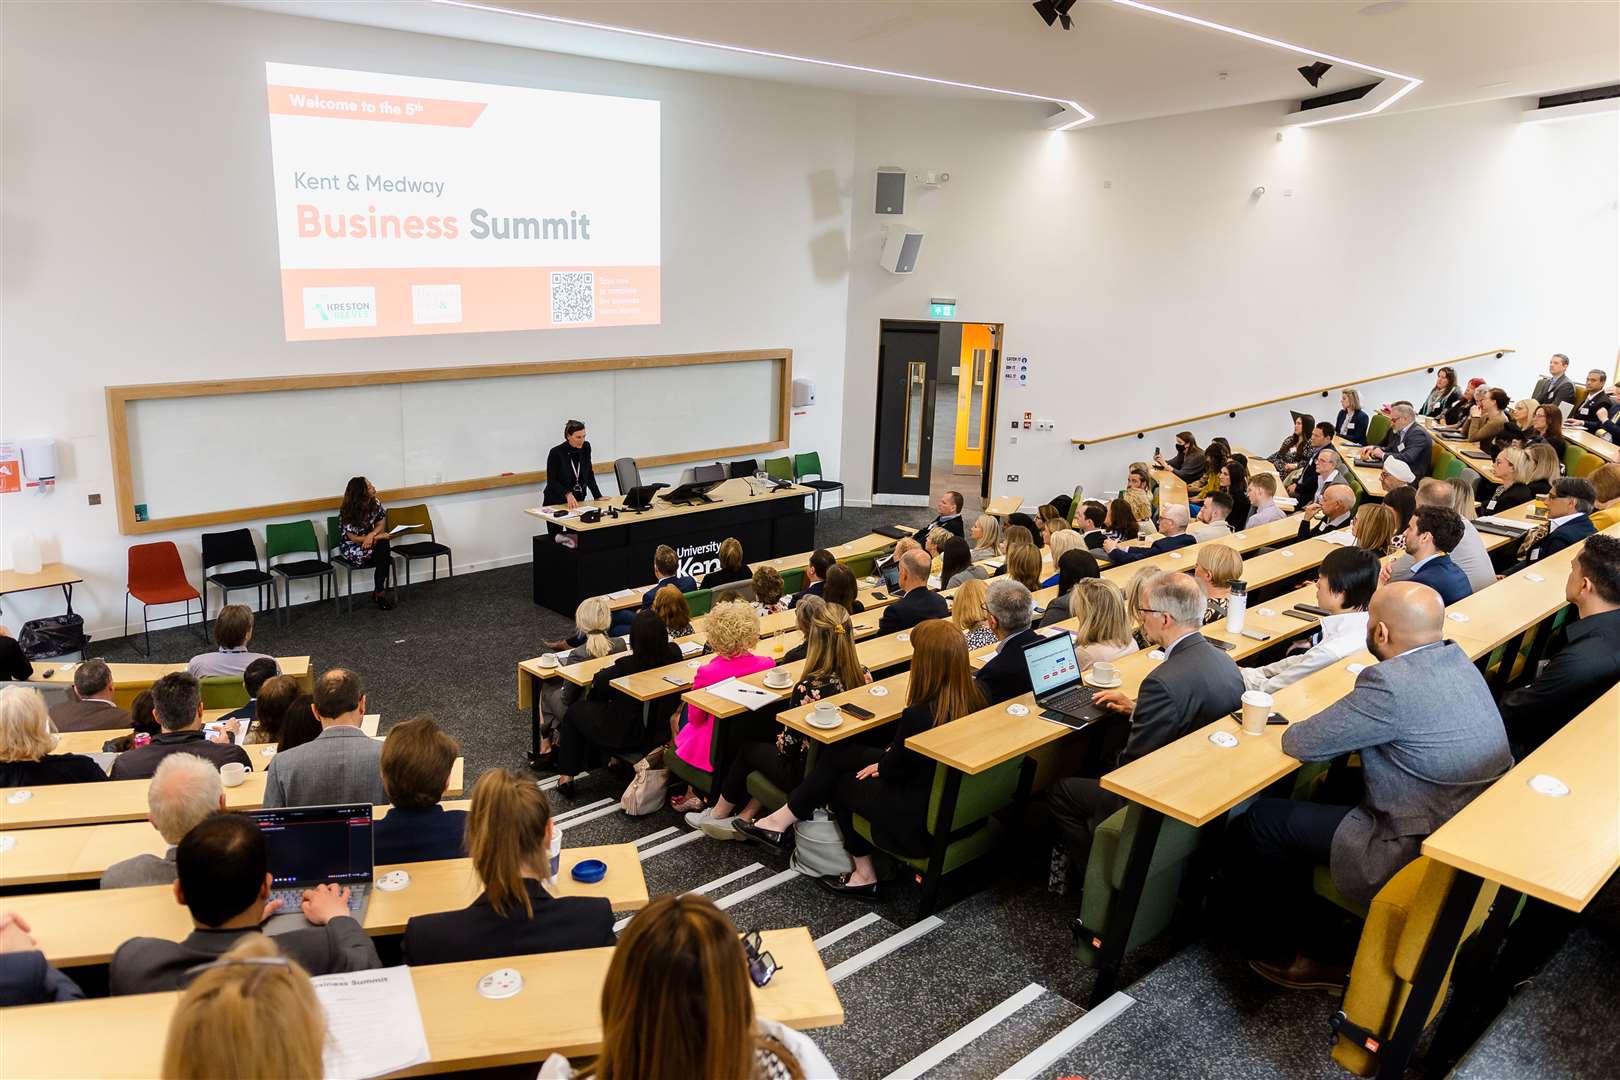 The Kent & Medway Business Summit takes place on January 13